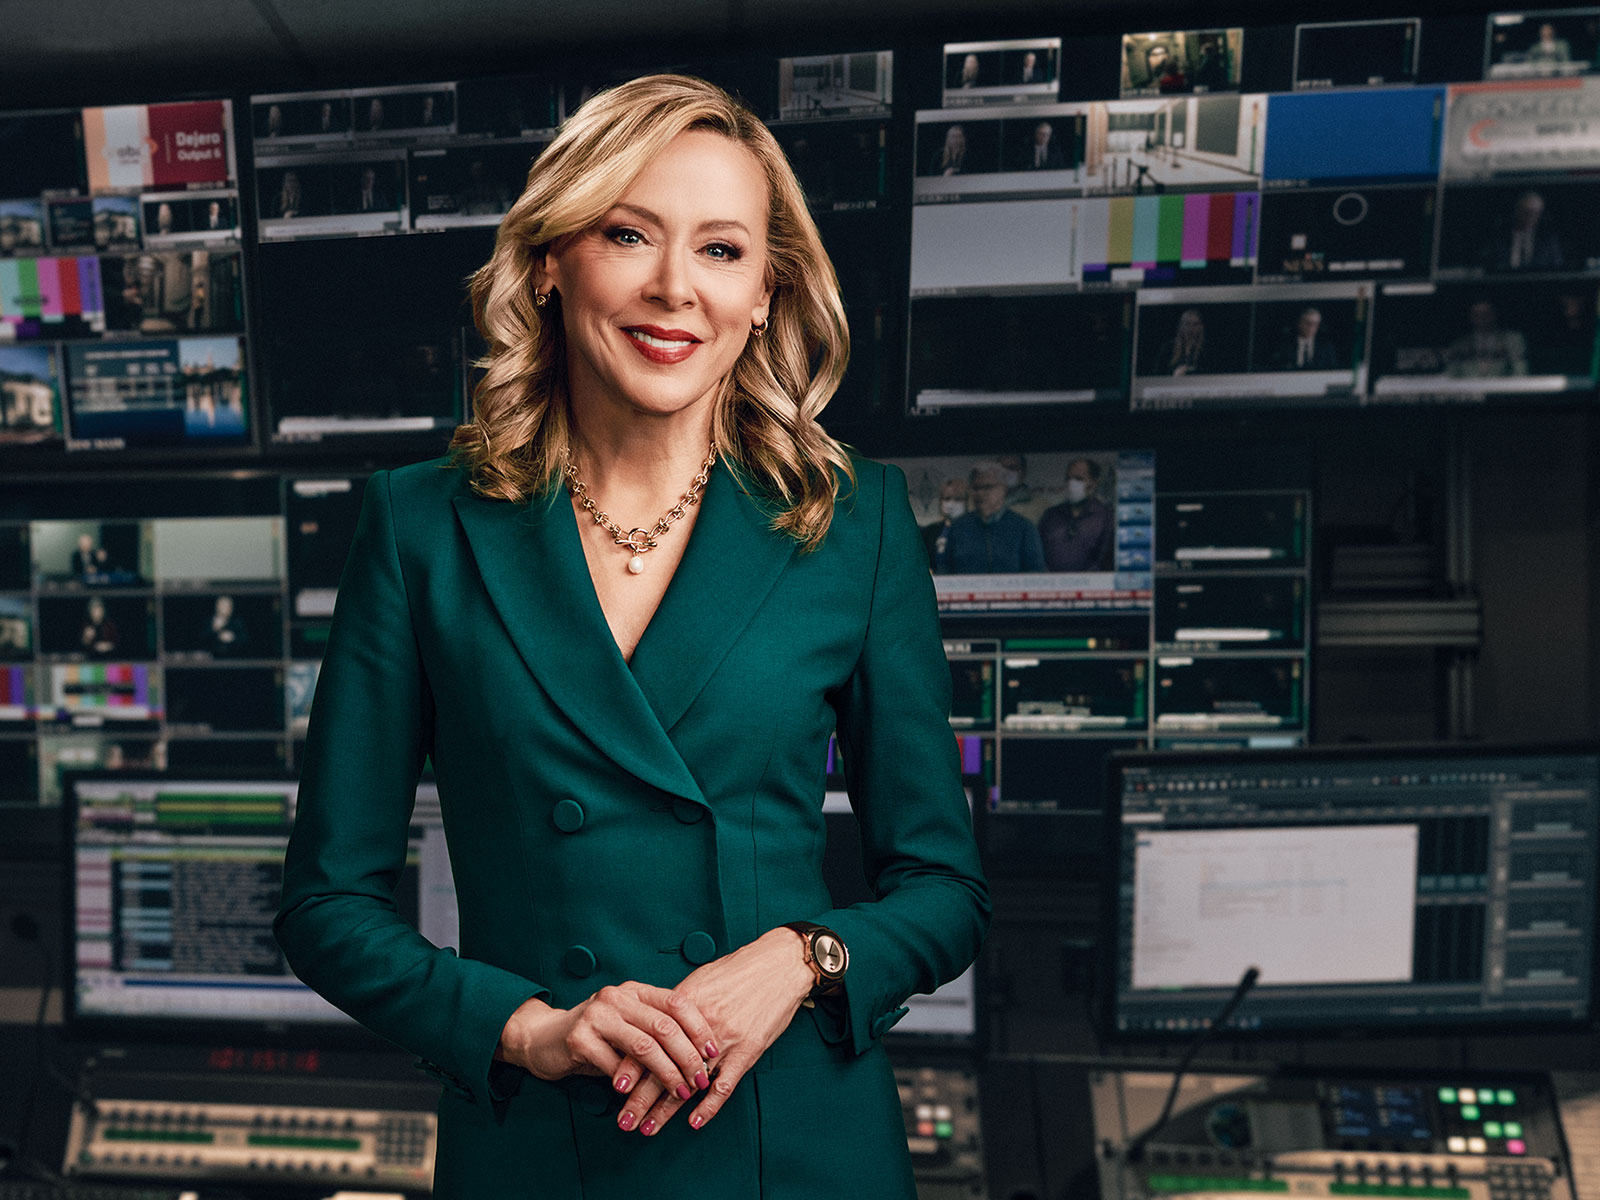 A confident woman in a green blazer with a beaming smile stands in a broadcast control room filled with screens and technical equipment.